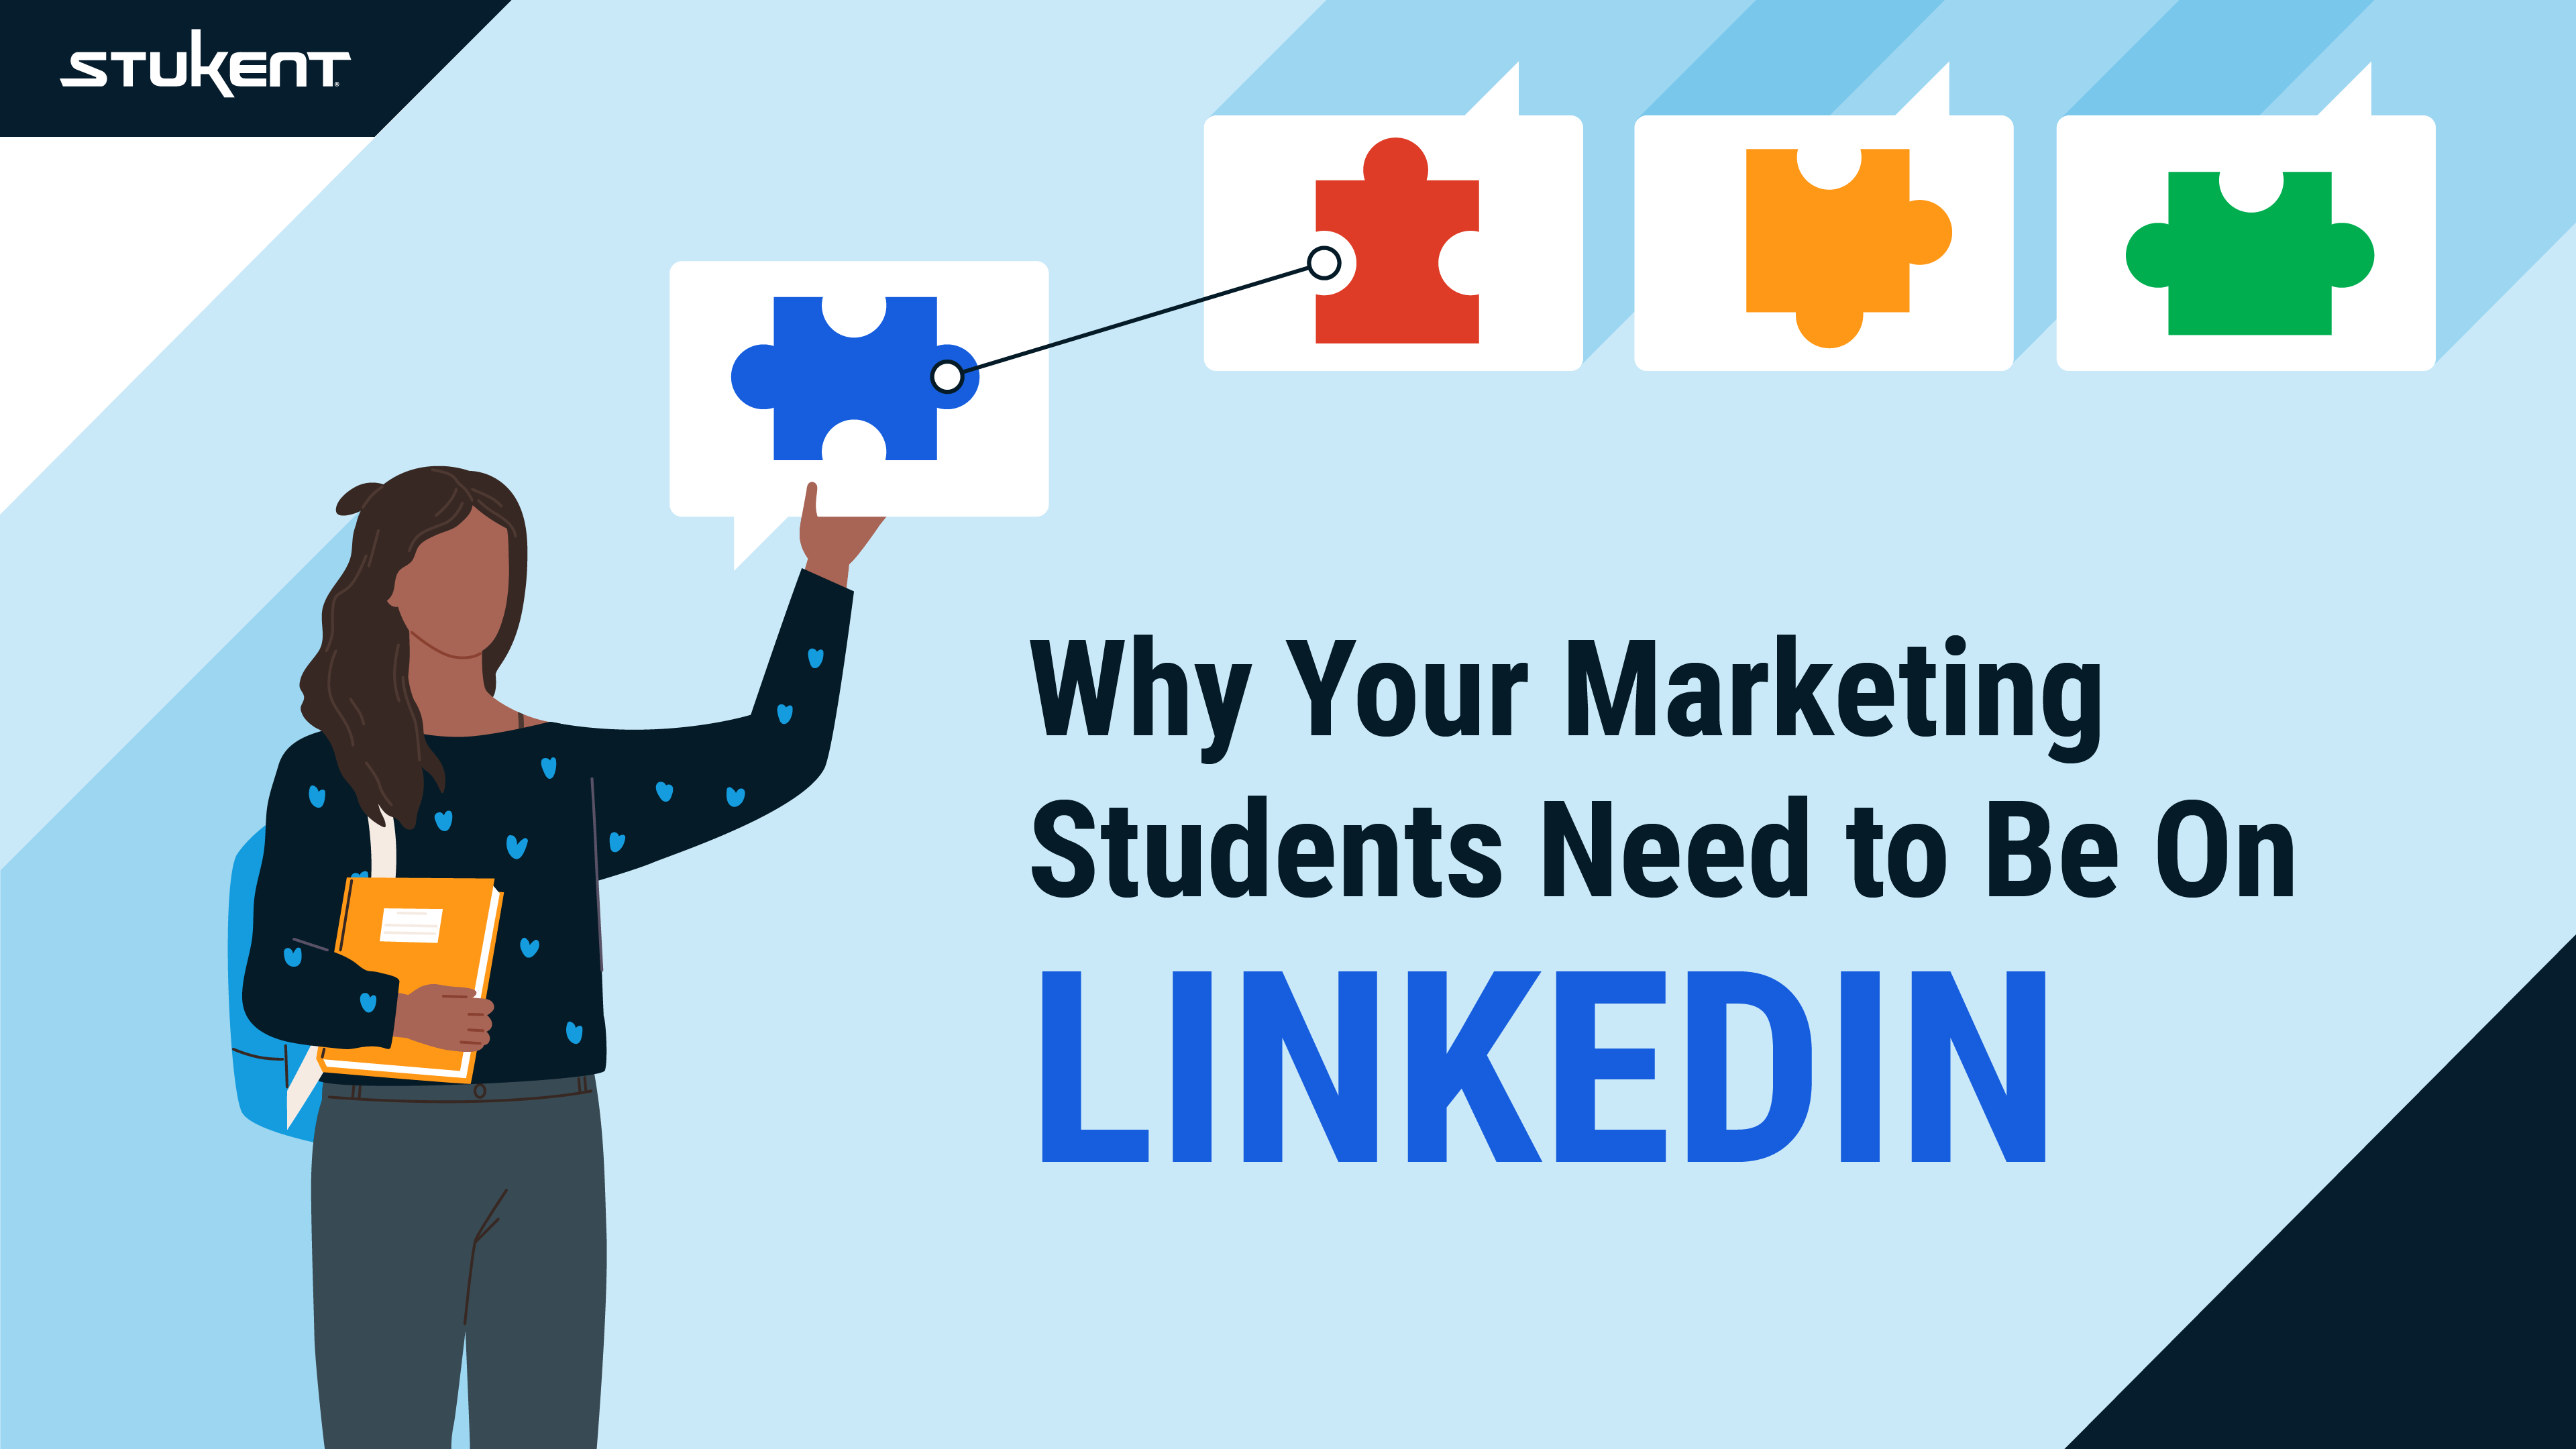 Why Your Students Need to be on LinkedIn